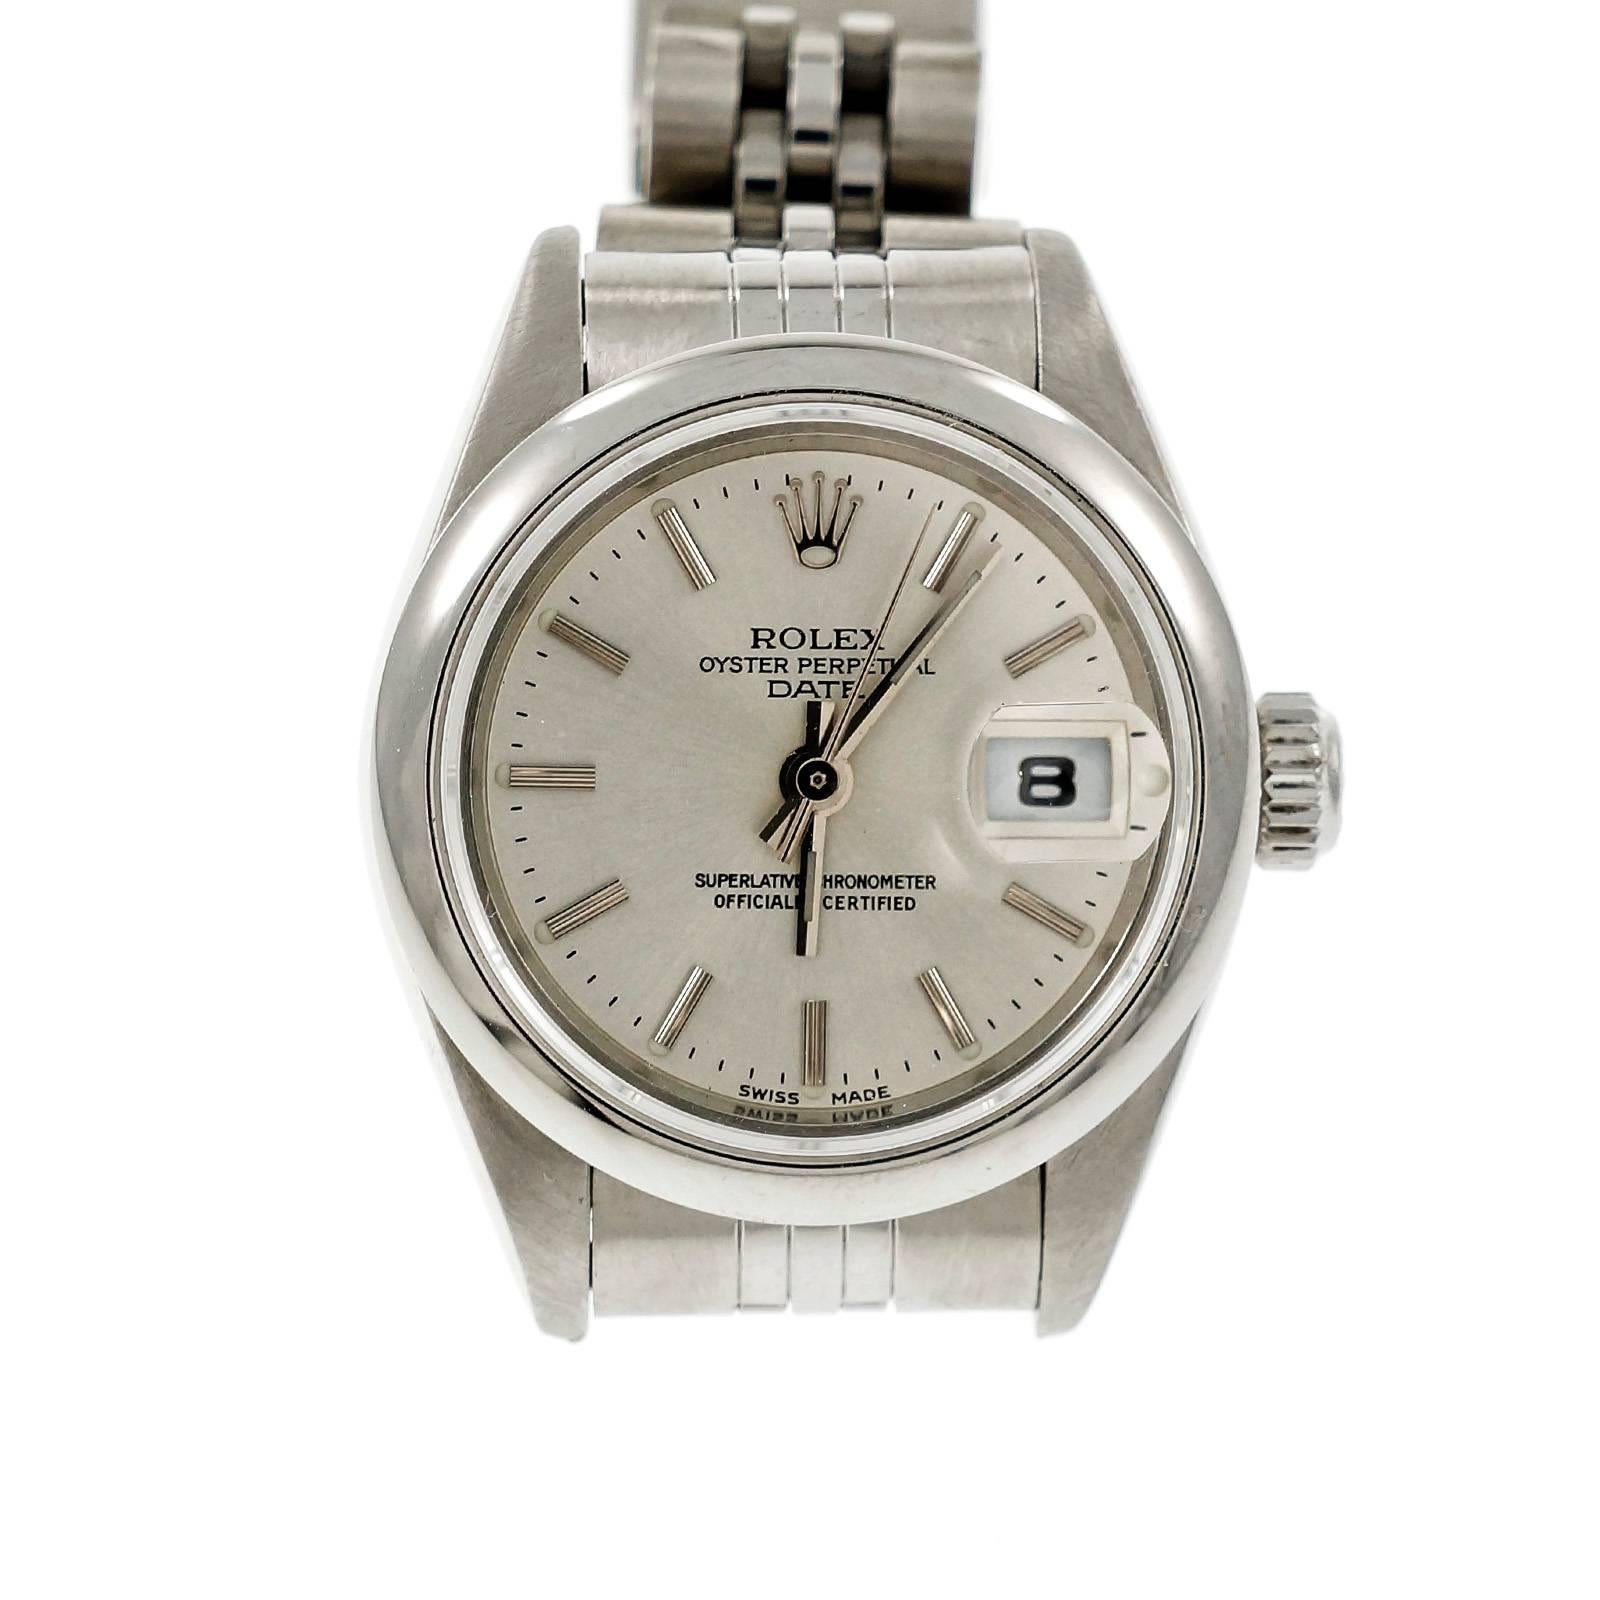 Ladies Rolex Oyster Perpetual Date plain bezel original Rolex dial. After market band with original Rolex end pieces and buckle. Model 79240. Circa 1999.

Stainless steel
54.7 grams
Band length: 7.75 inches – can be shortened or links